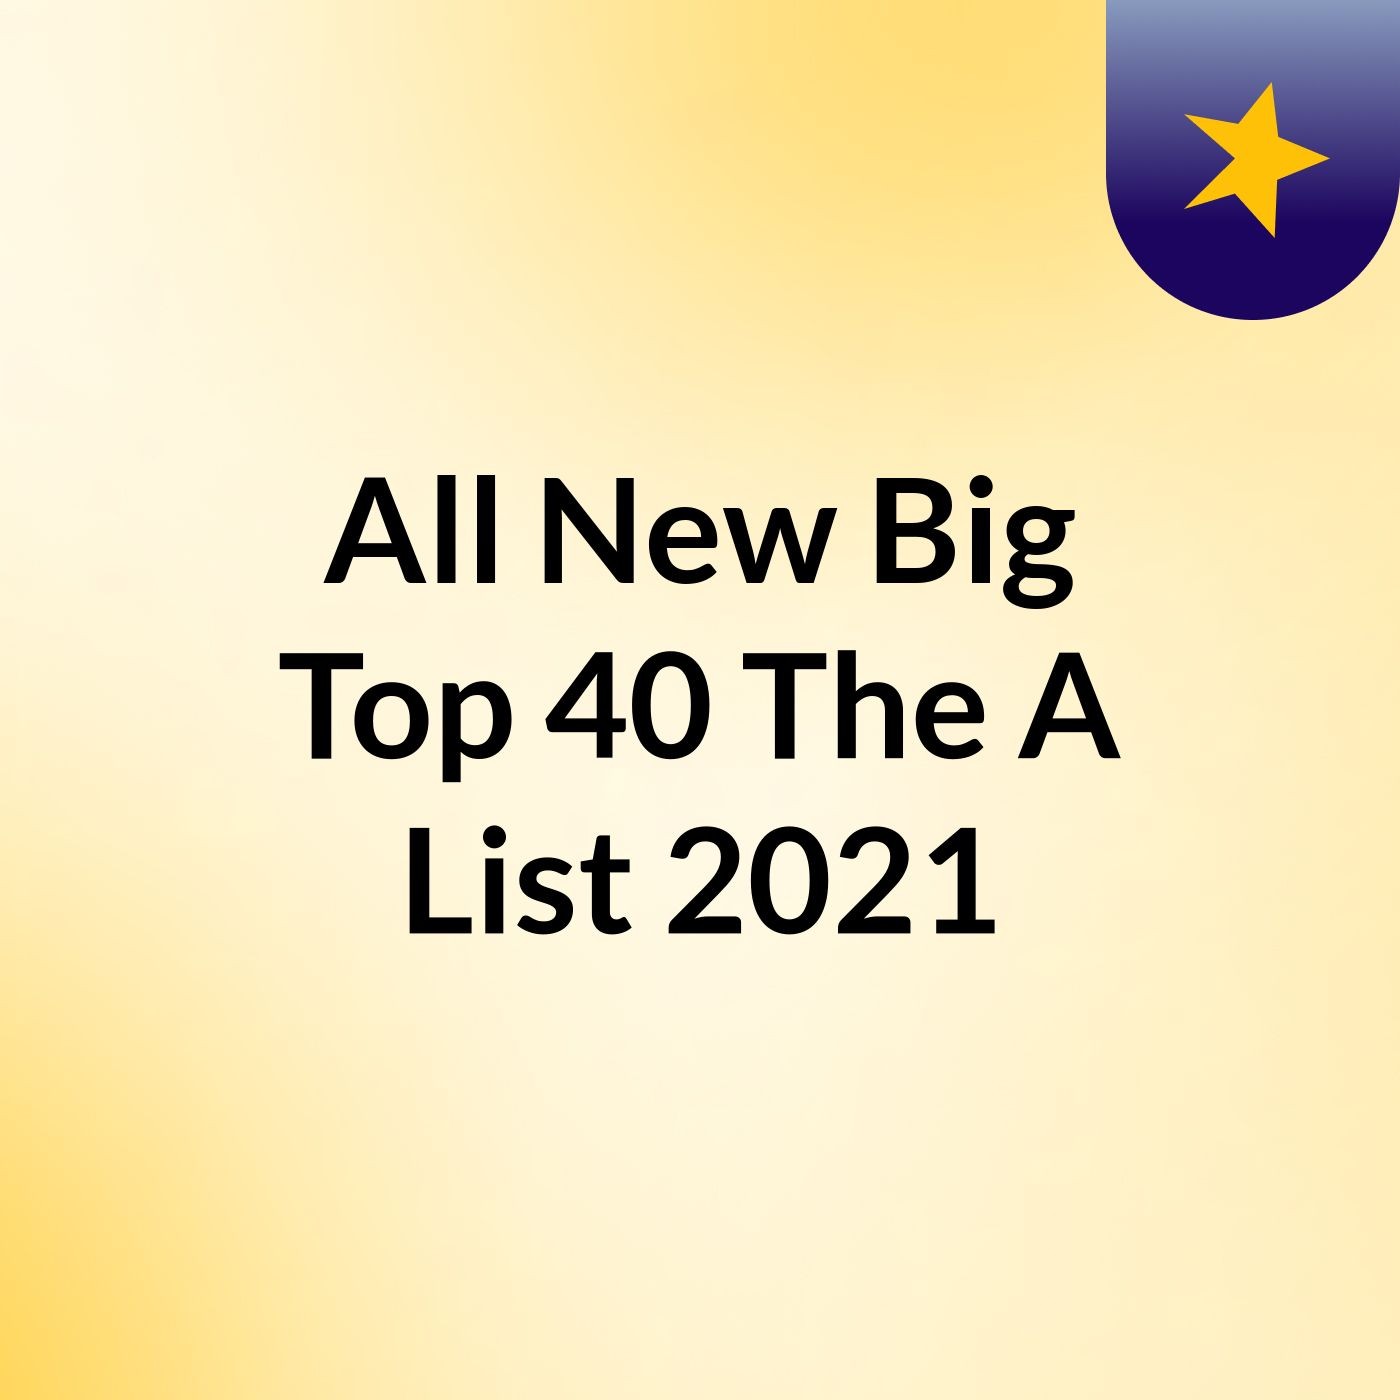 All New Big Top 40 The A List 2021